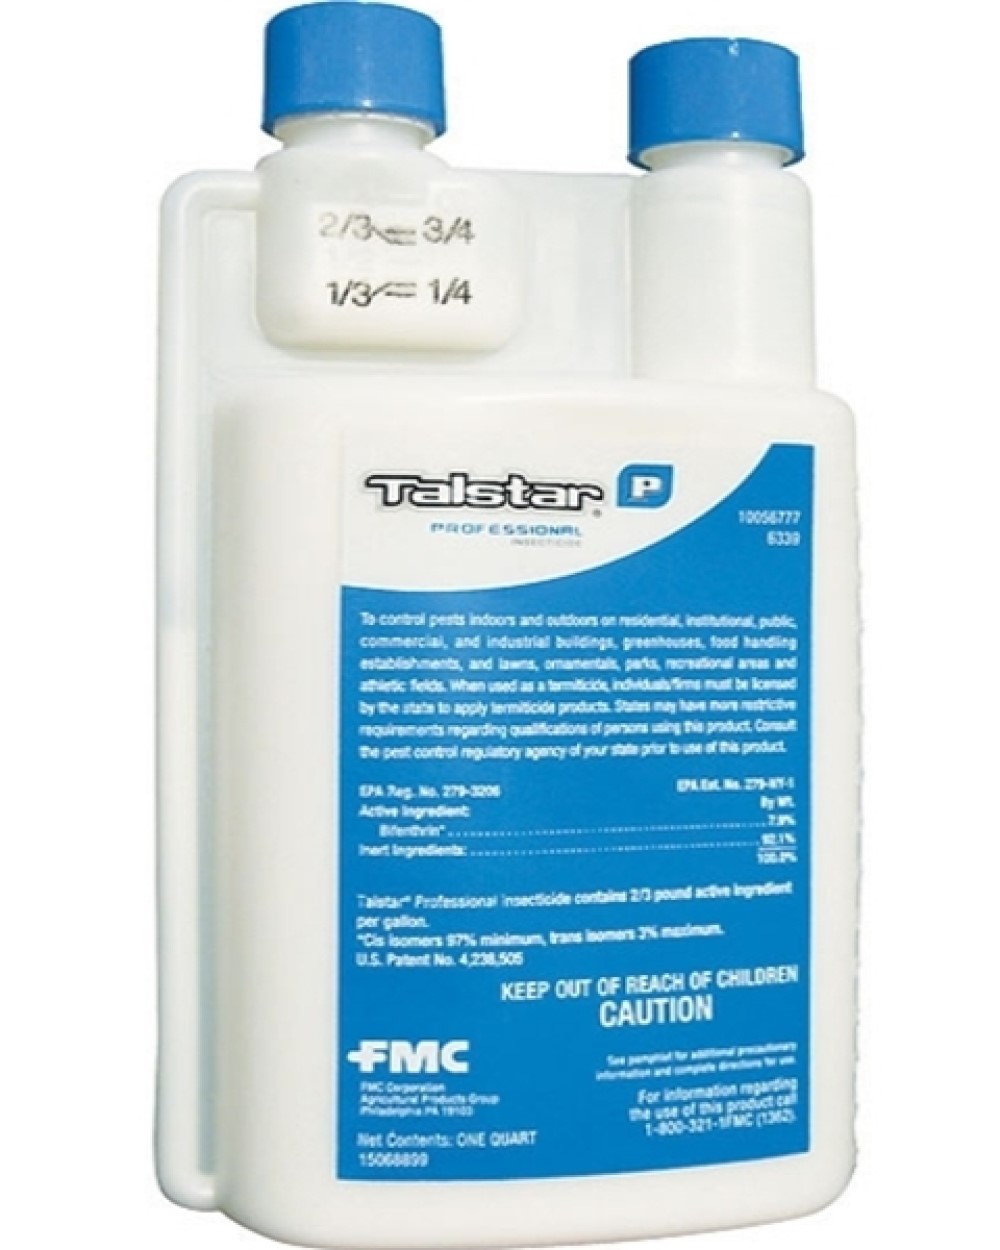 Talstar P Insecticide - Kills Over 75 Household Pests & Invaders - 32 fl oz Bottle by FMC - image 1 of 14